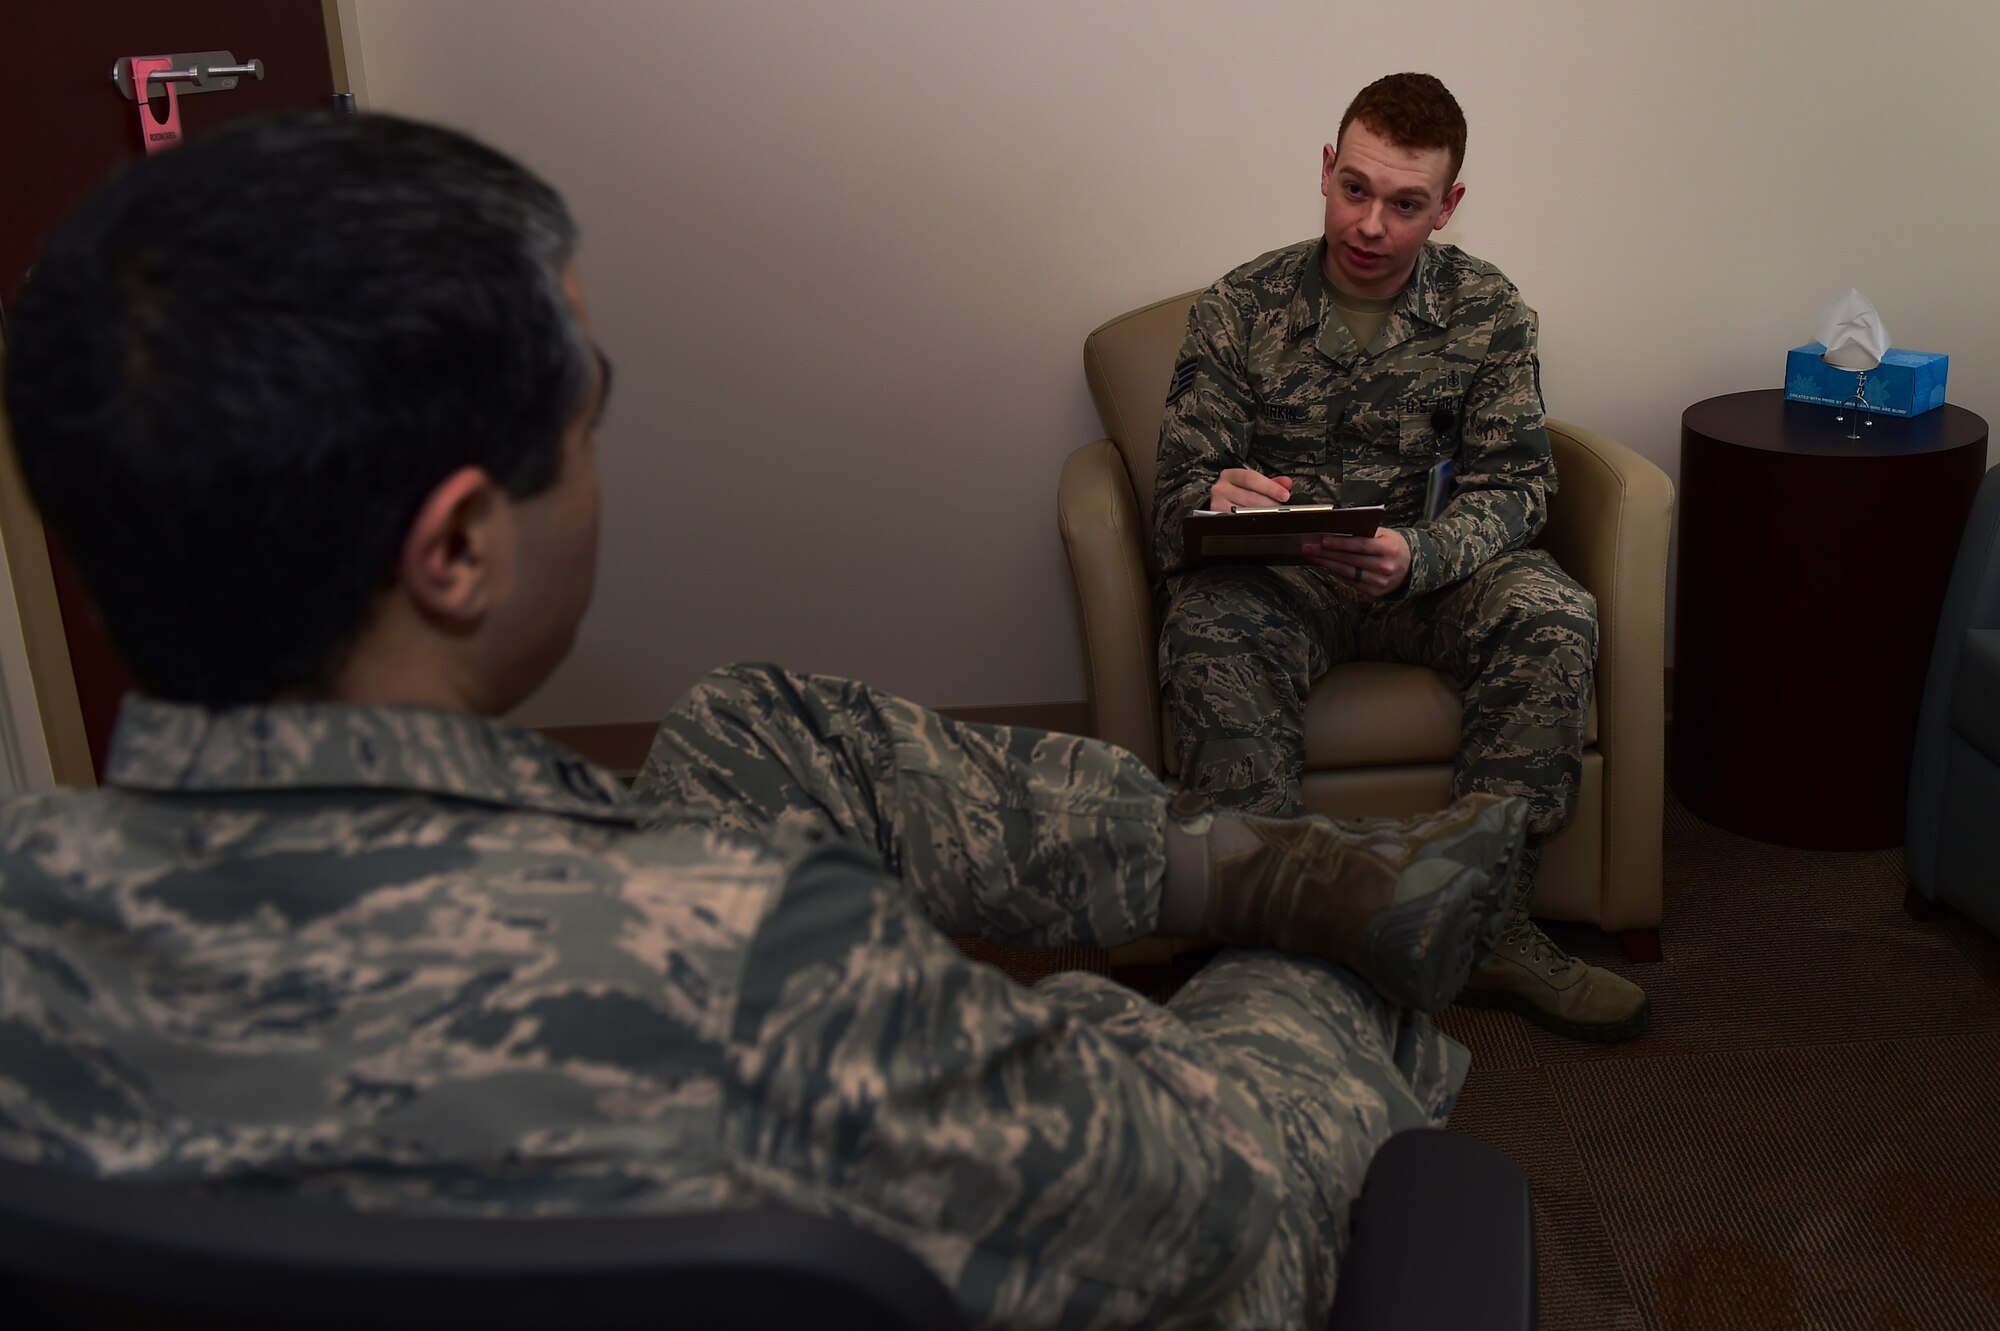 Staff Sgt. Christopher Durkin, 460th Medical Group Air Force Alcohol and Drug Abuse Prevention and Treatment NCO in charge, speaks to Capt. Robert Justiniano, 460th MDG ADAPT manager, Jan. 20, 2017, at the Veterans Affairs Joint Venture Buckley Clinic in Aurora, Colo. Justiniano and Durkin must have constant communication about the ADAPT program to ensure patients are receiving the necessary care. (U.S. Air Force photo by Airman 1st Class Gabrielle Spradling/Released)